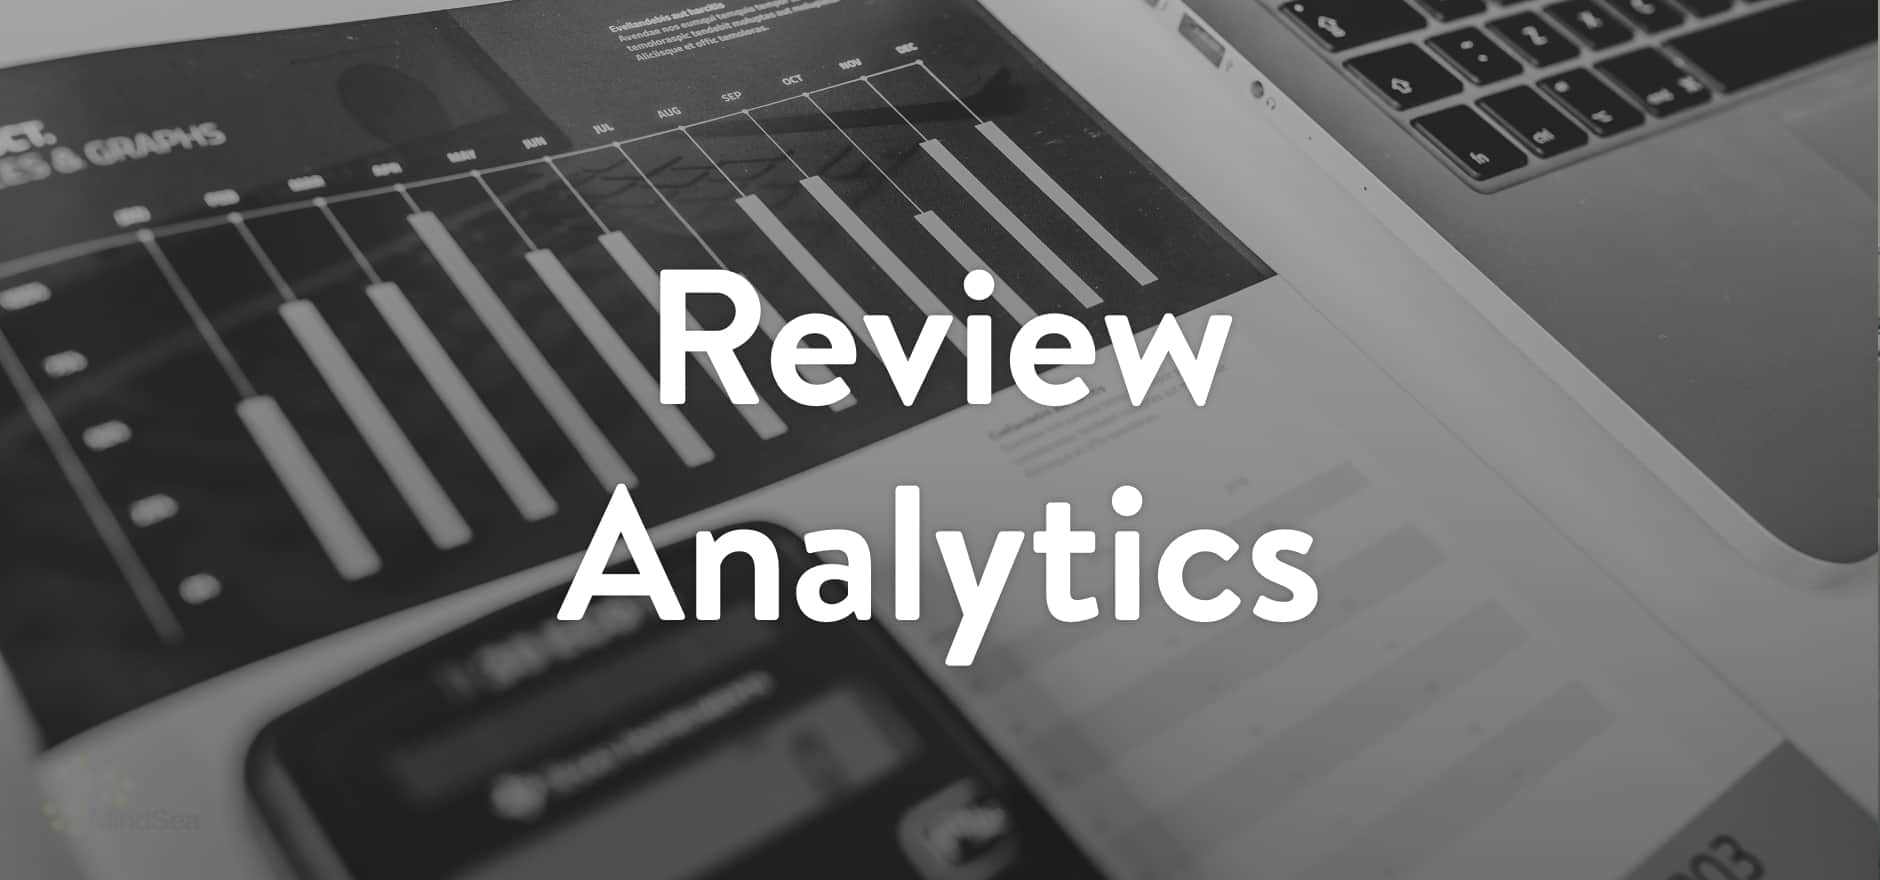 Review Analytics for app success